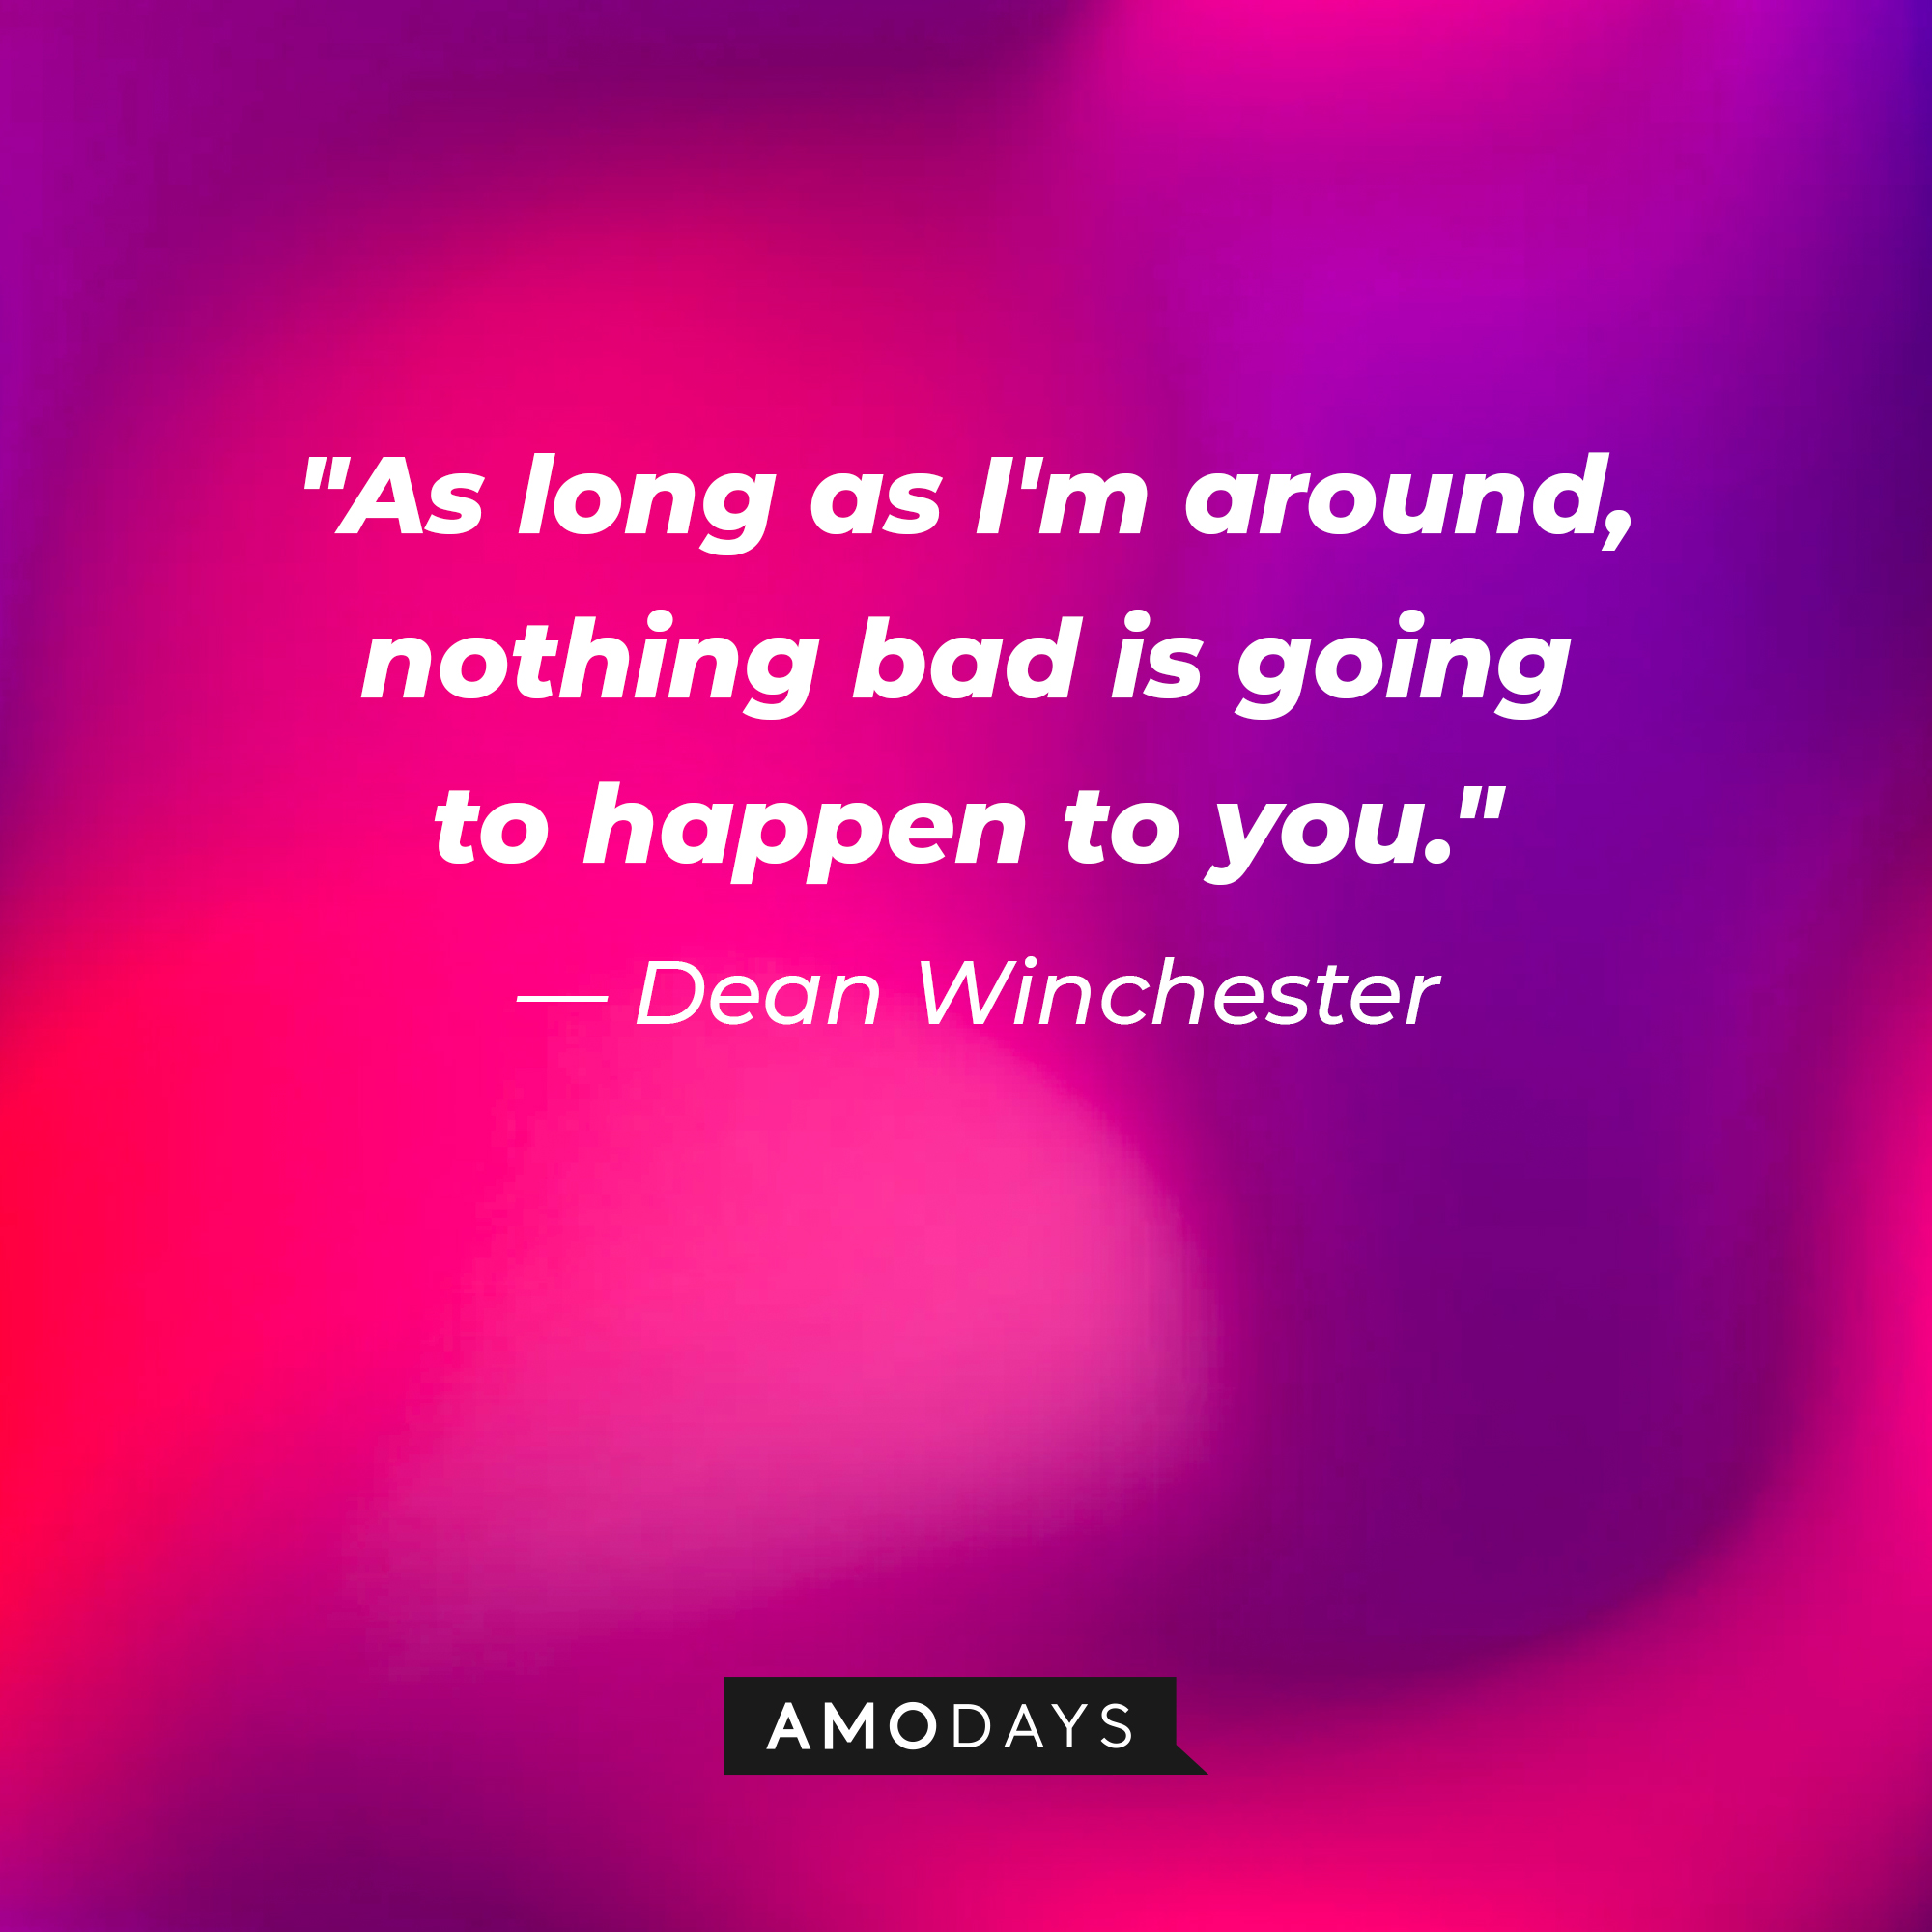 Dean Winchester's quote, "As long as I'm around, nothing bad is going to happen to you." | Source: Amodays